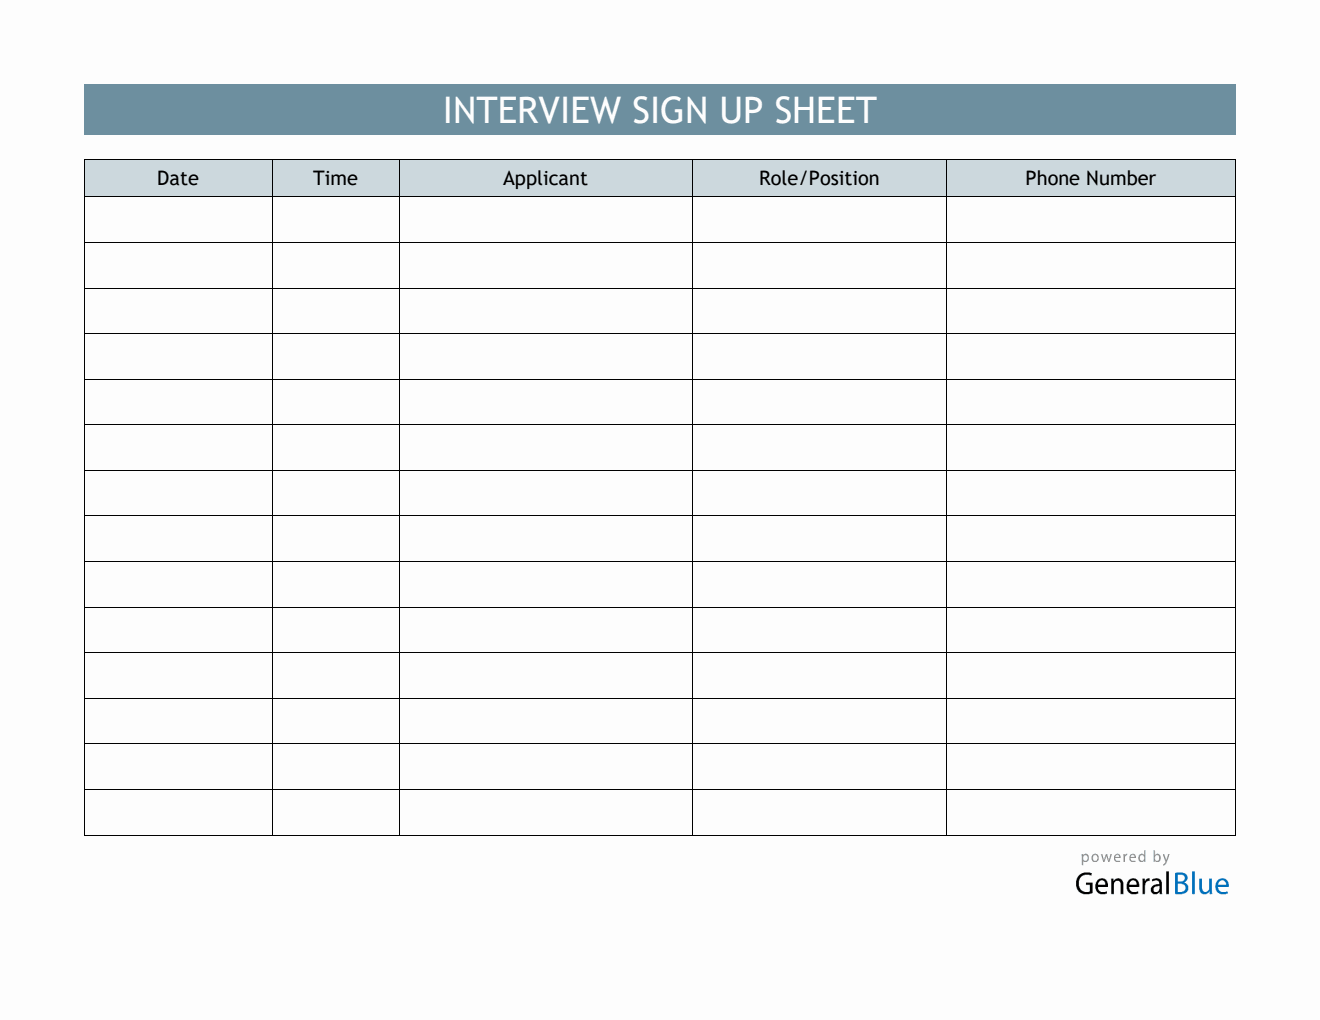 Interview Sign Up Sheet Template in Word (Colorful)